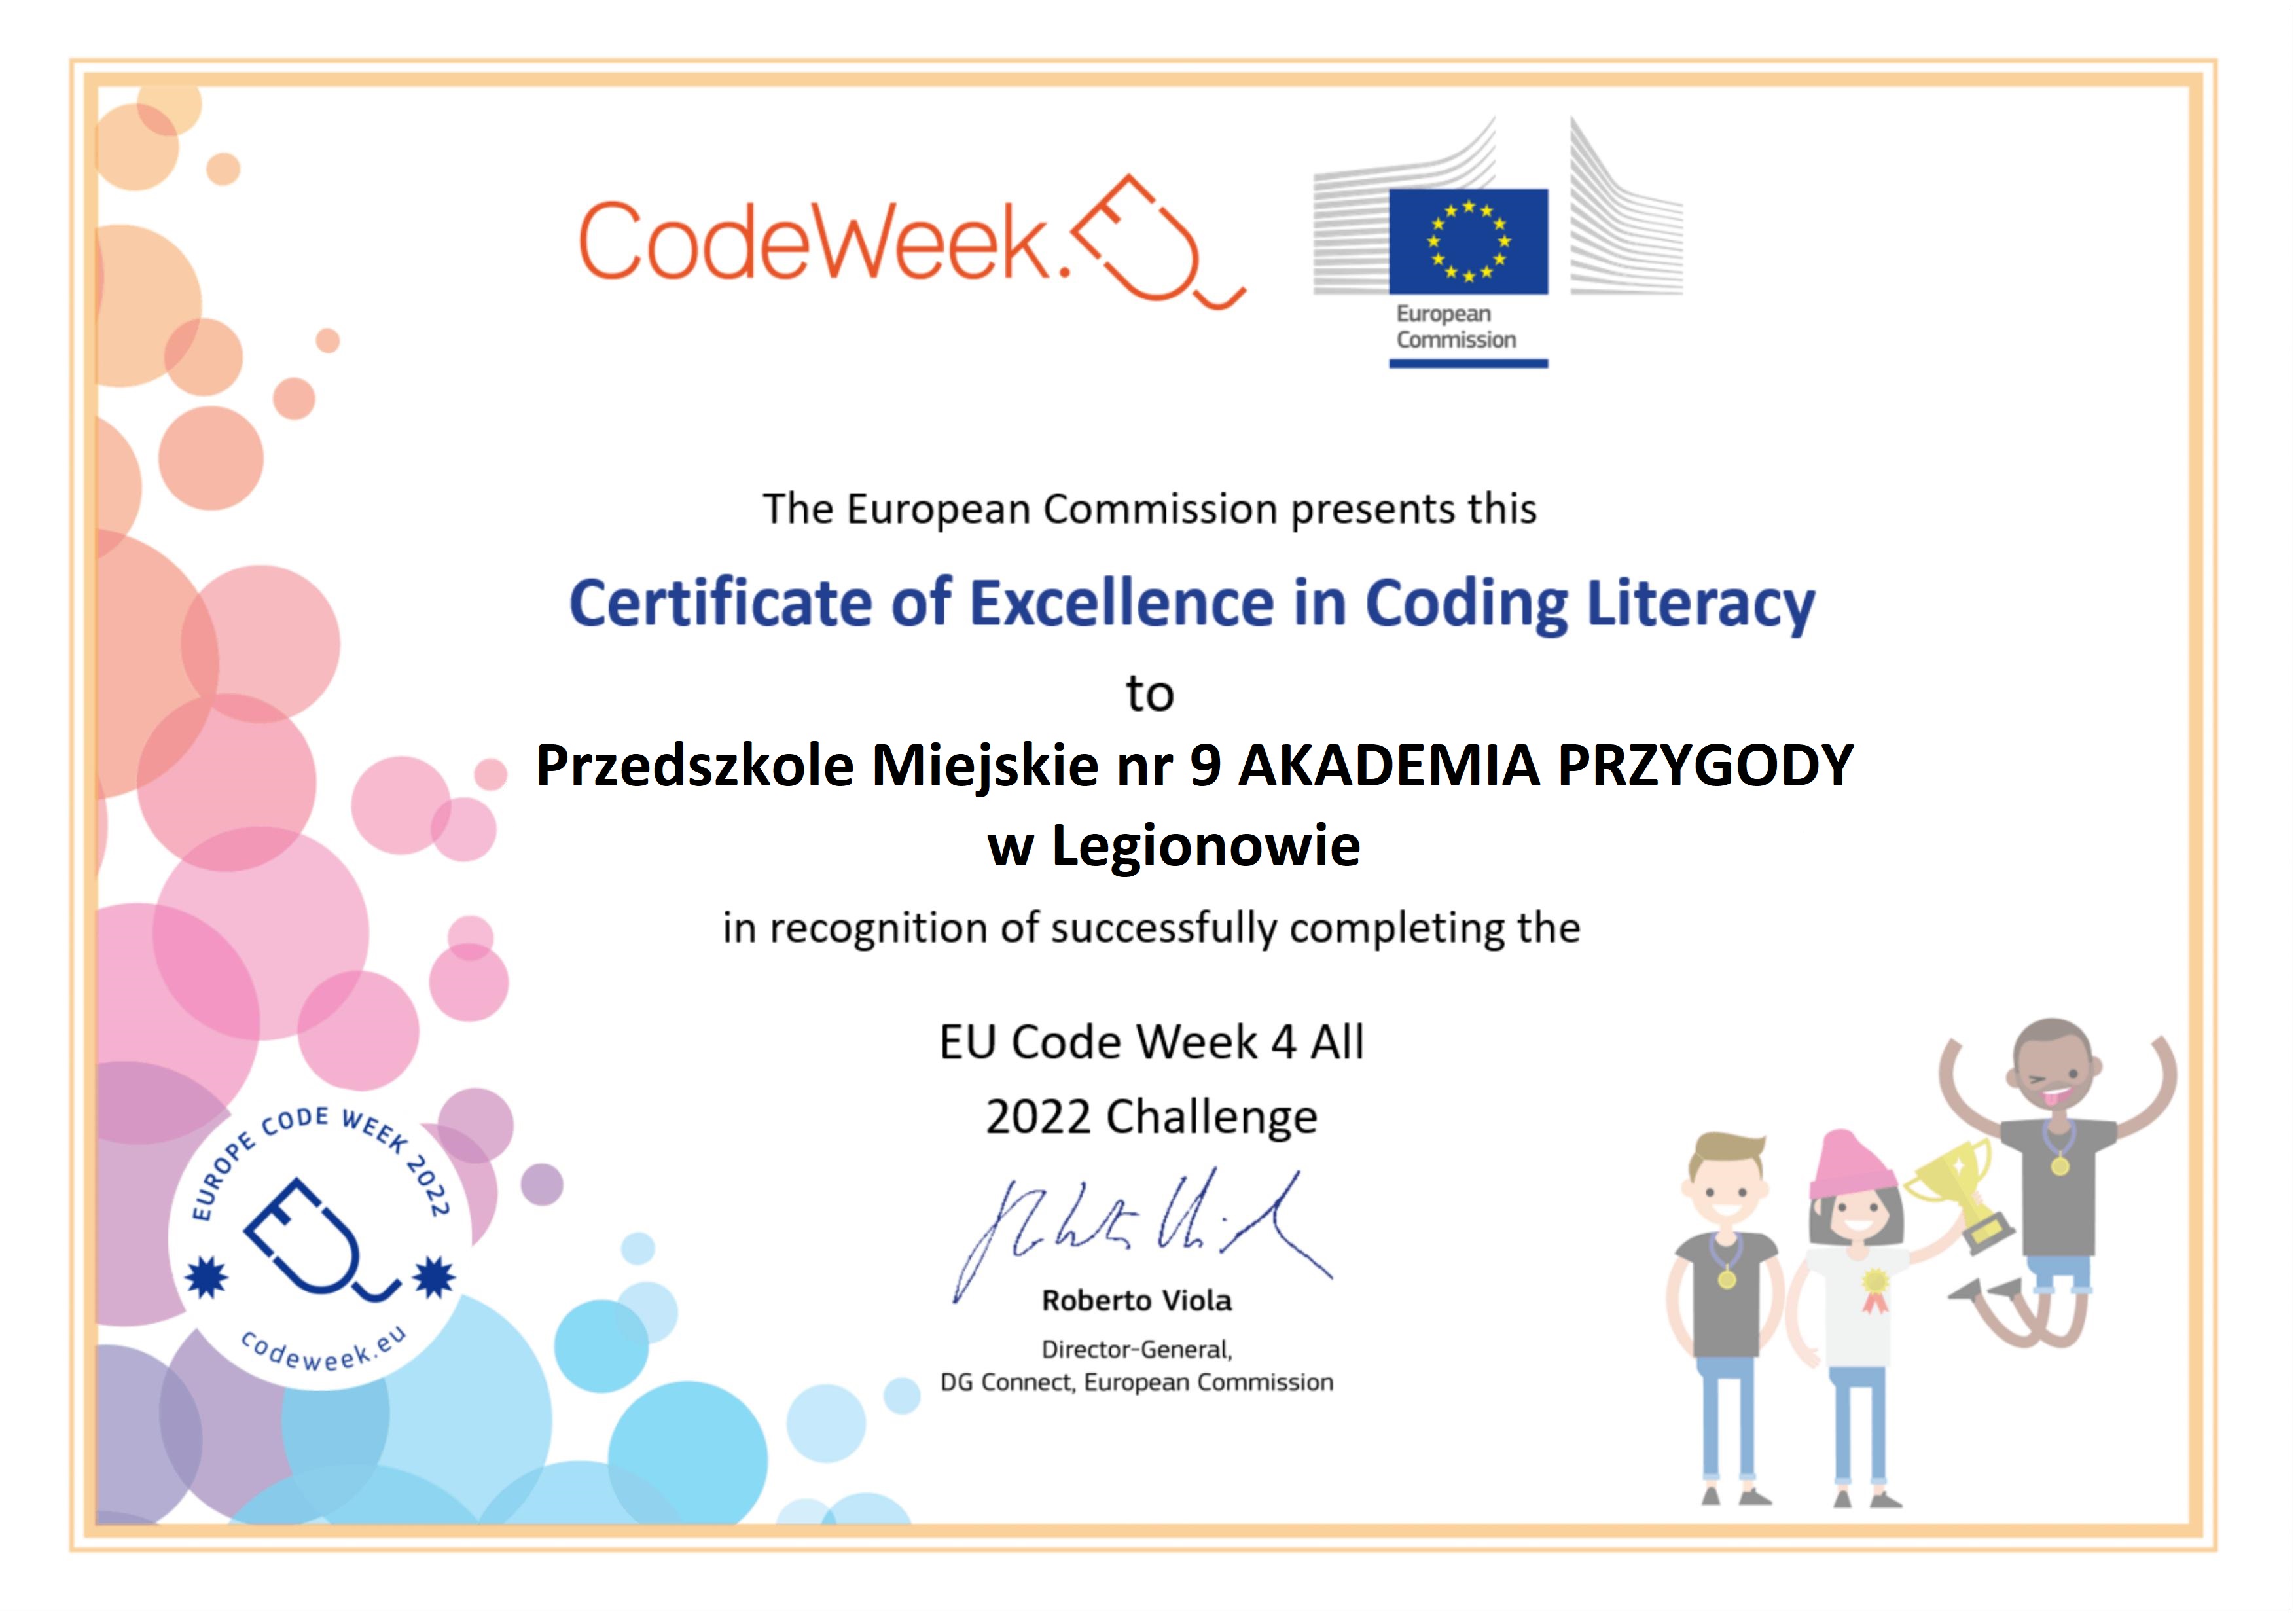 certyfikat of excellence in Coding Literacy_PM.jpg (588 KB)